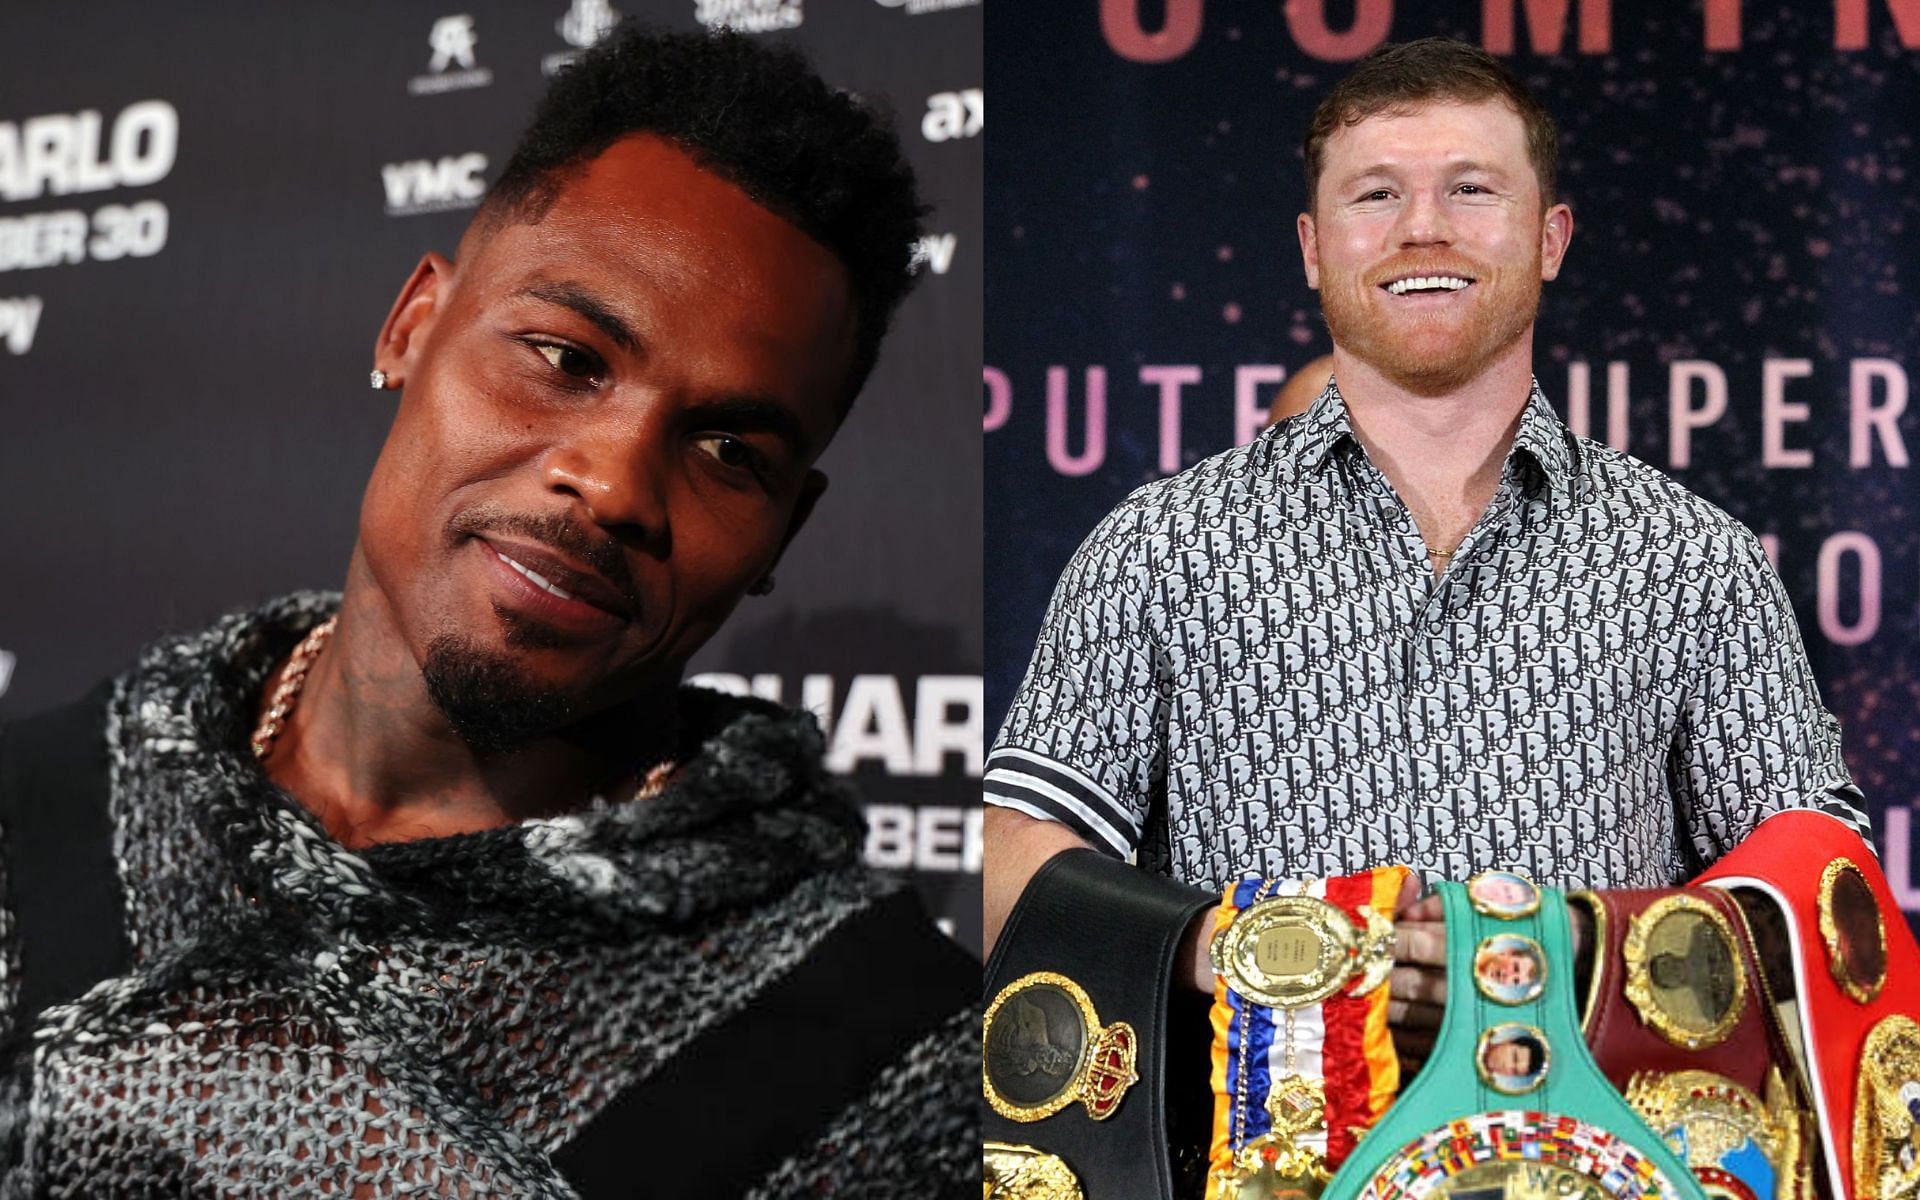 Jermell Charlo (left) and Canelo Alvarez (right) [Images Courtesy: @GettyImages]